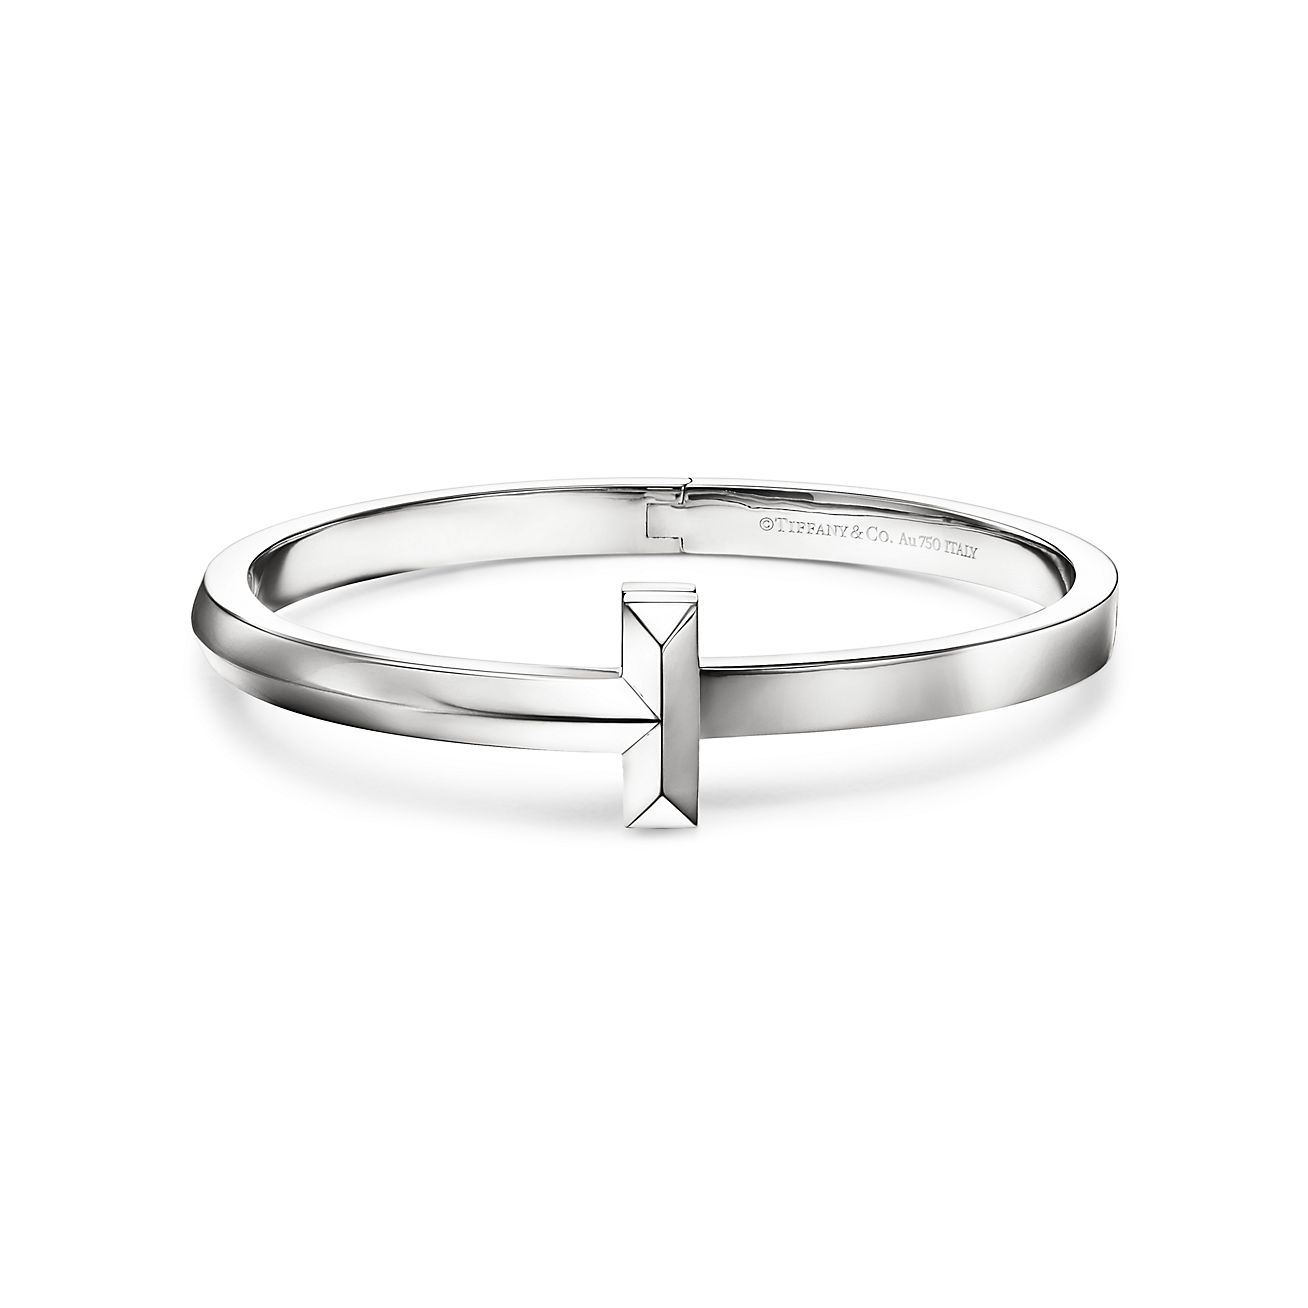 Tiffany T T1 Hinged Bangle in White Gold, Wide | Tiffany & Co.